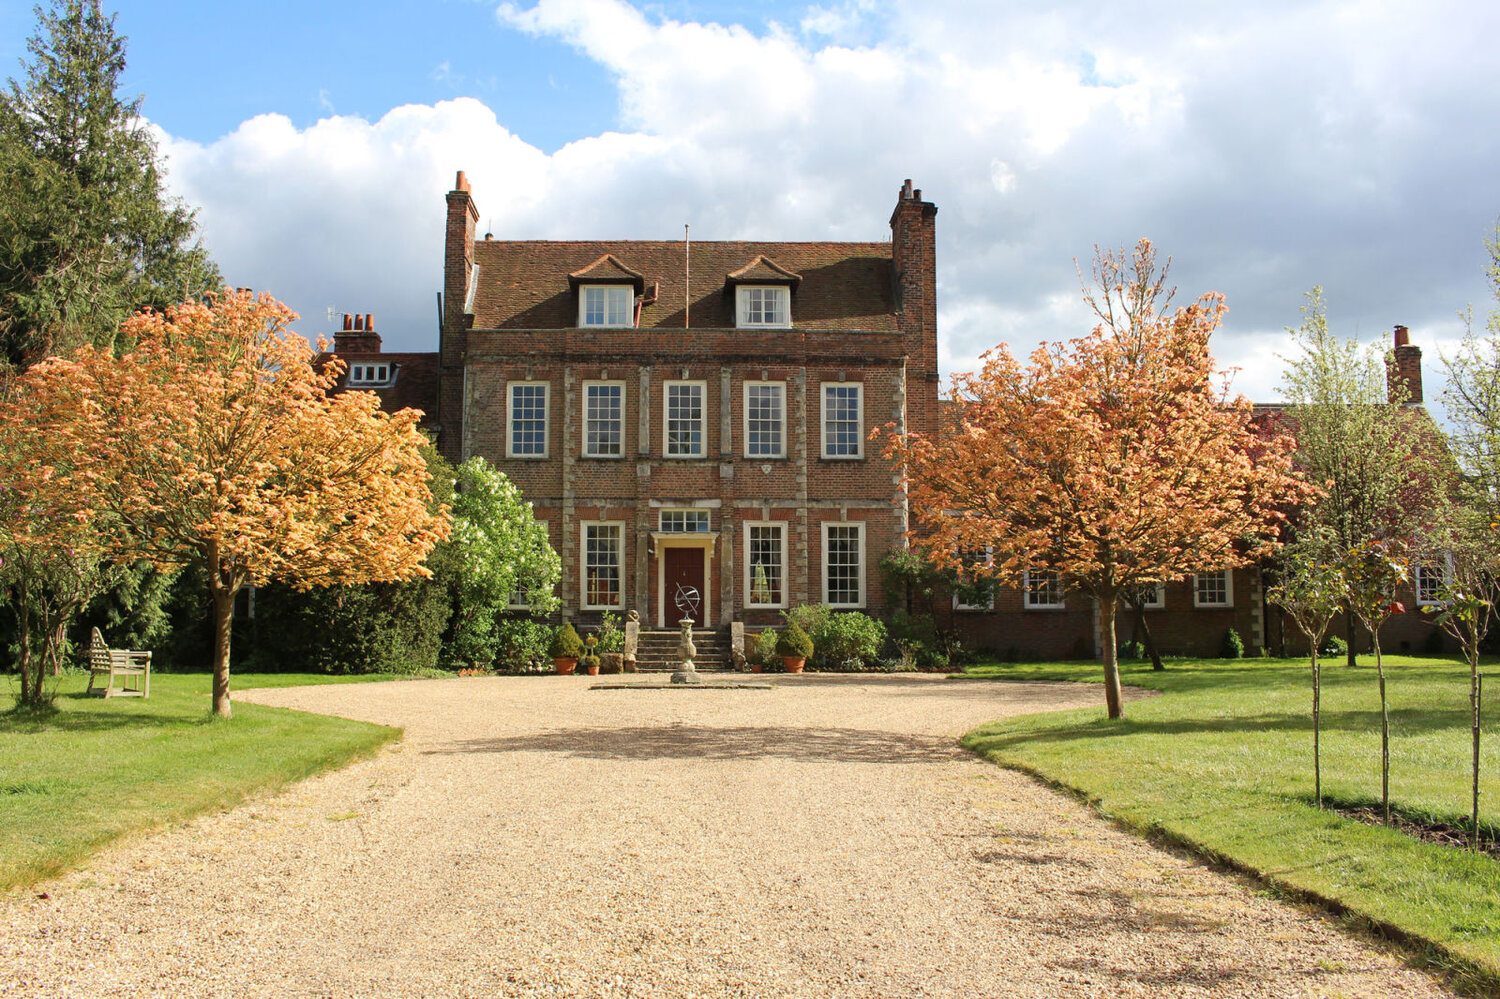 The Facade of Byfleet Manor, the location of the residence of the Dowager Countess